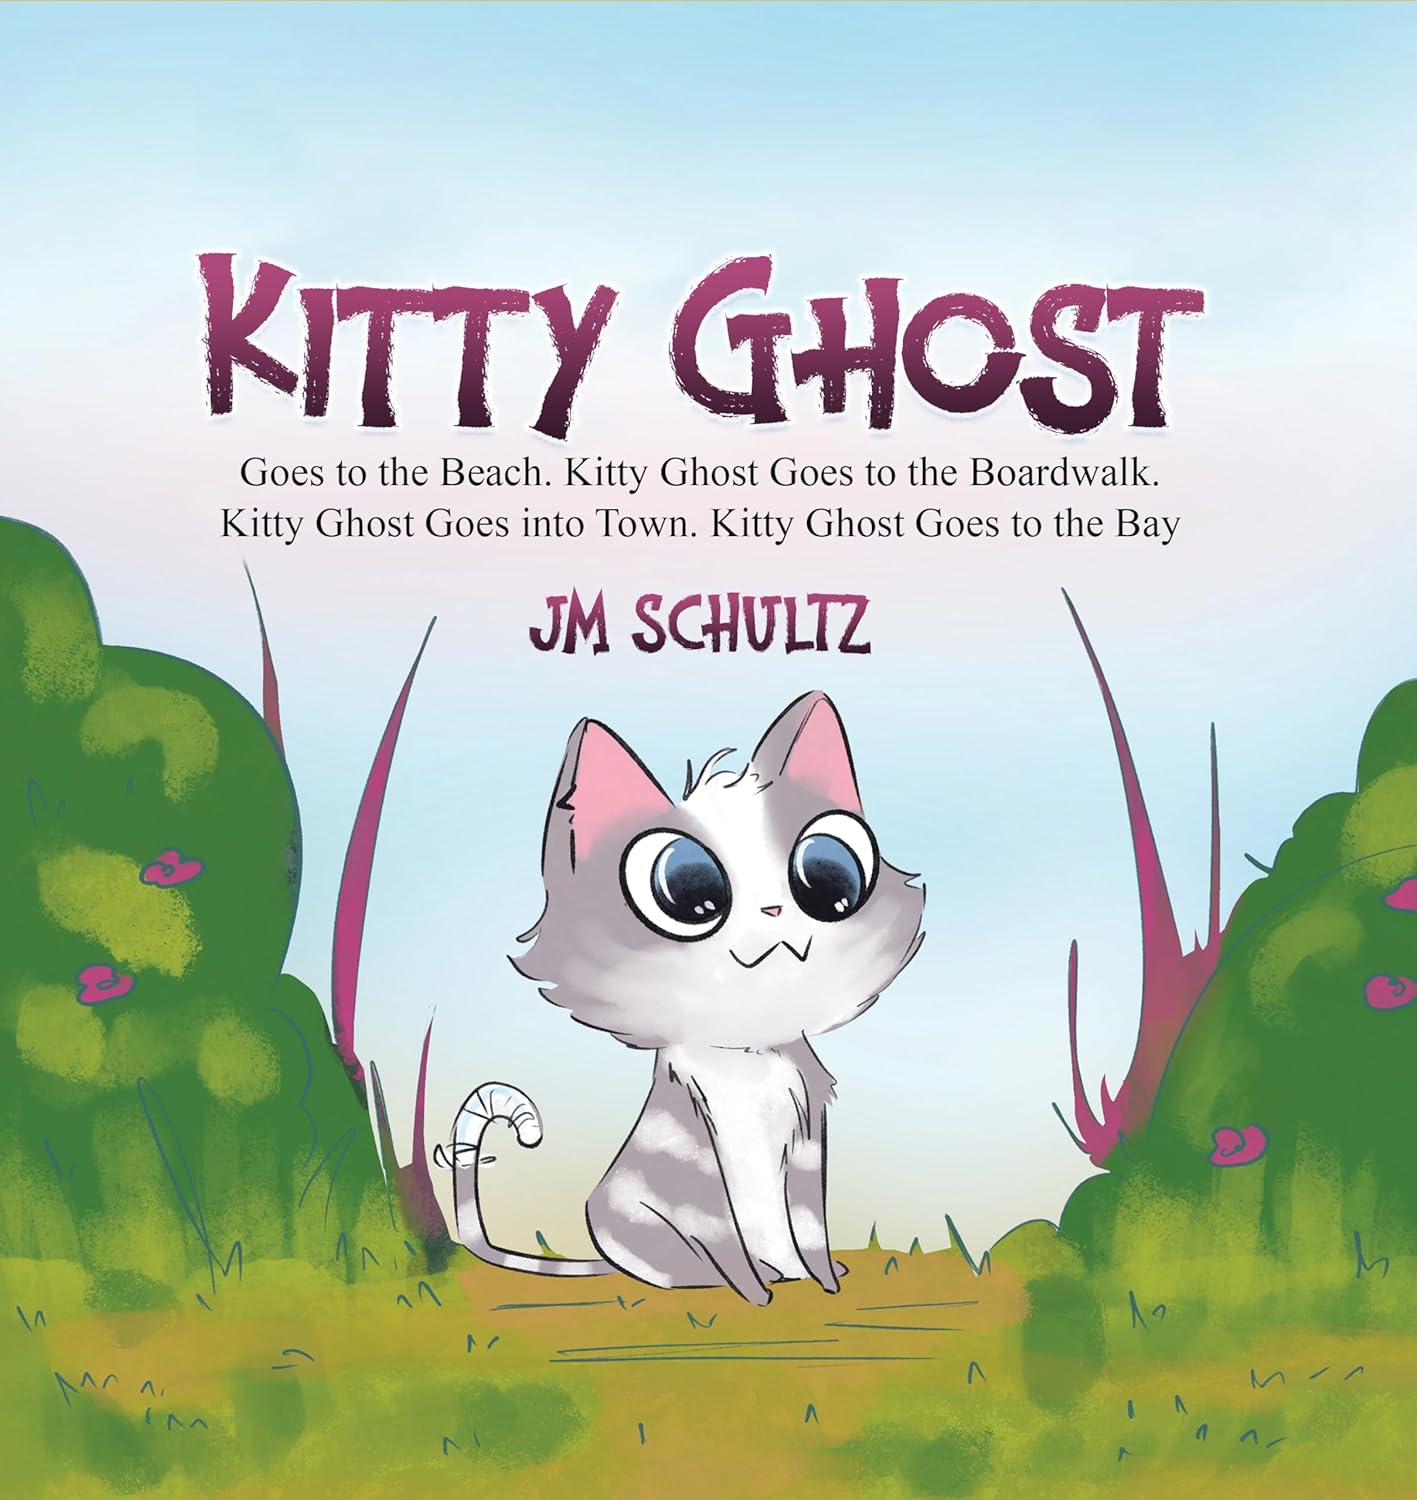 "Kitty Ghost": A New Heartwarming Tale by J.M. Schultz Celebrates Resilience and Compassion